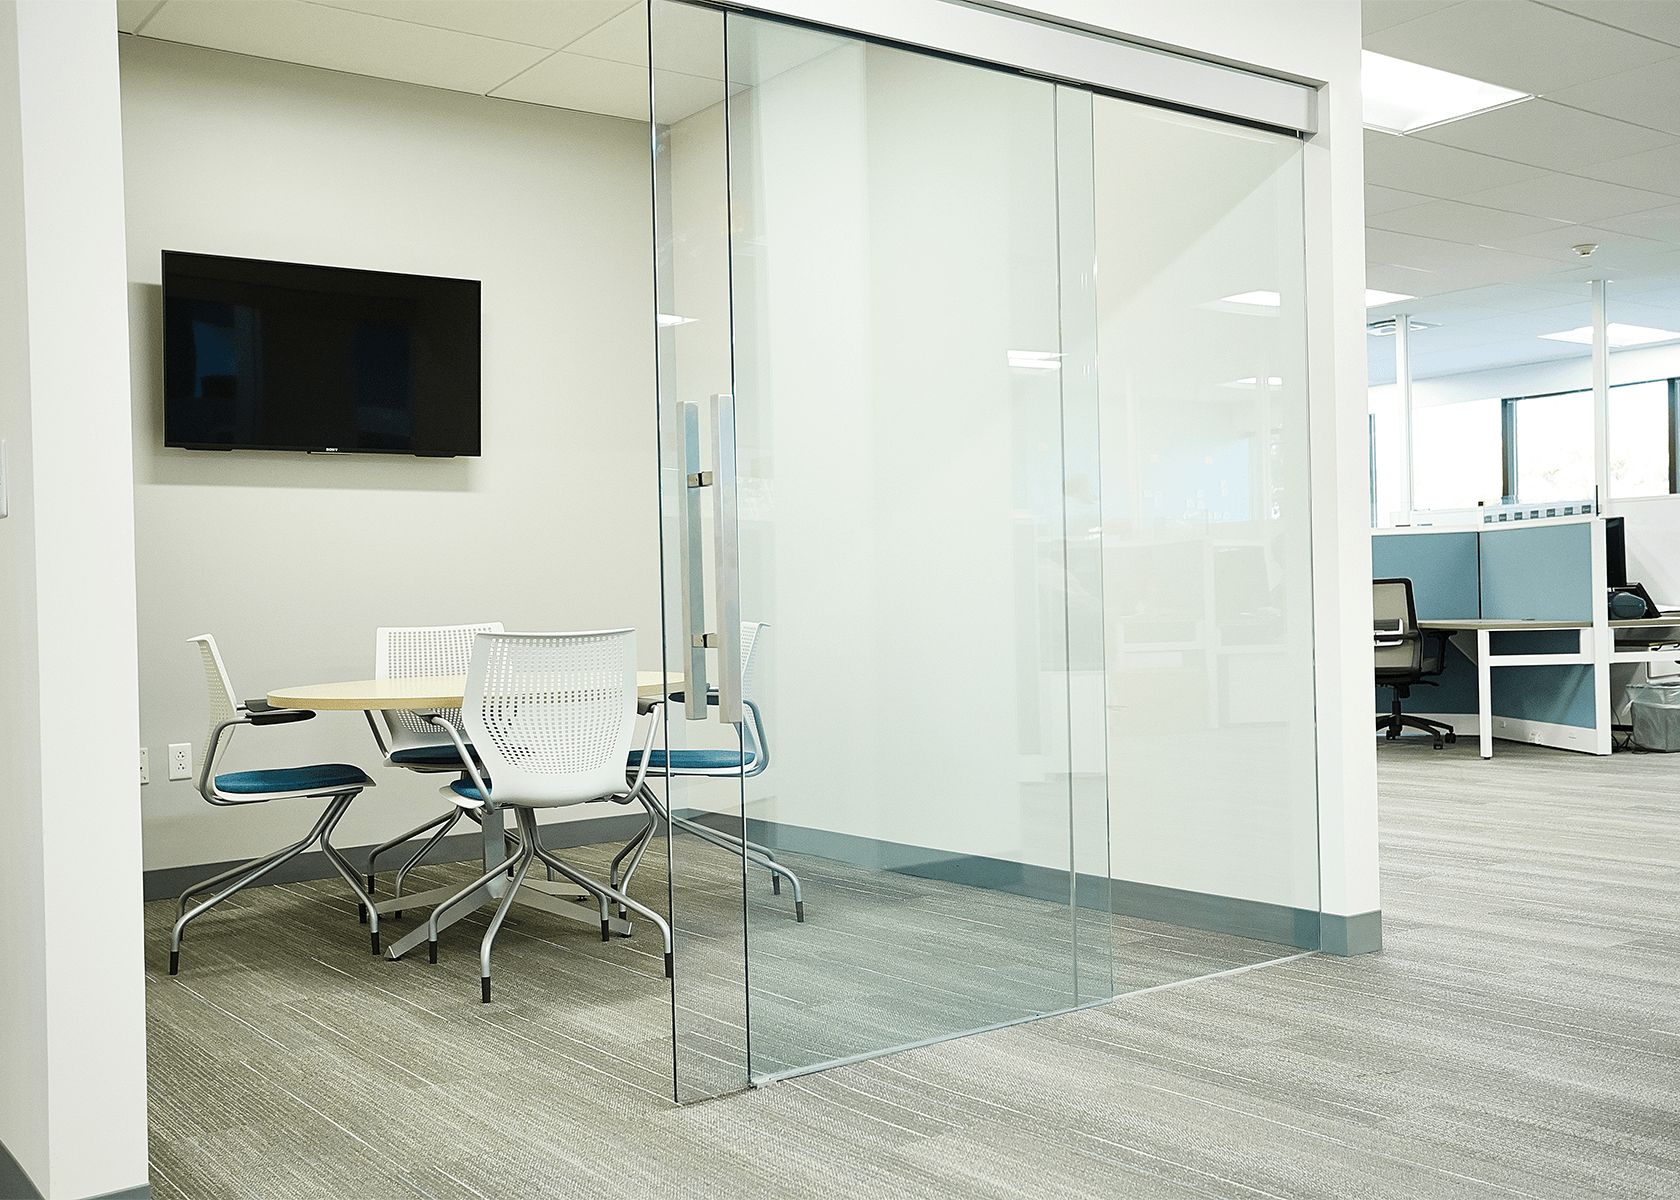 Small collaborative office with glass sliding door